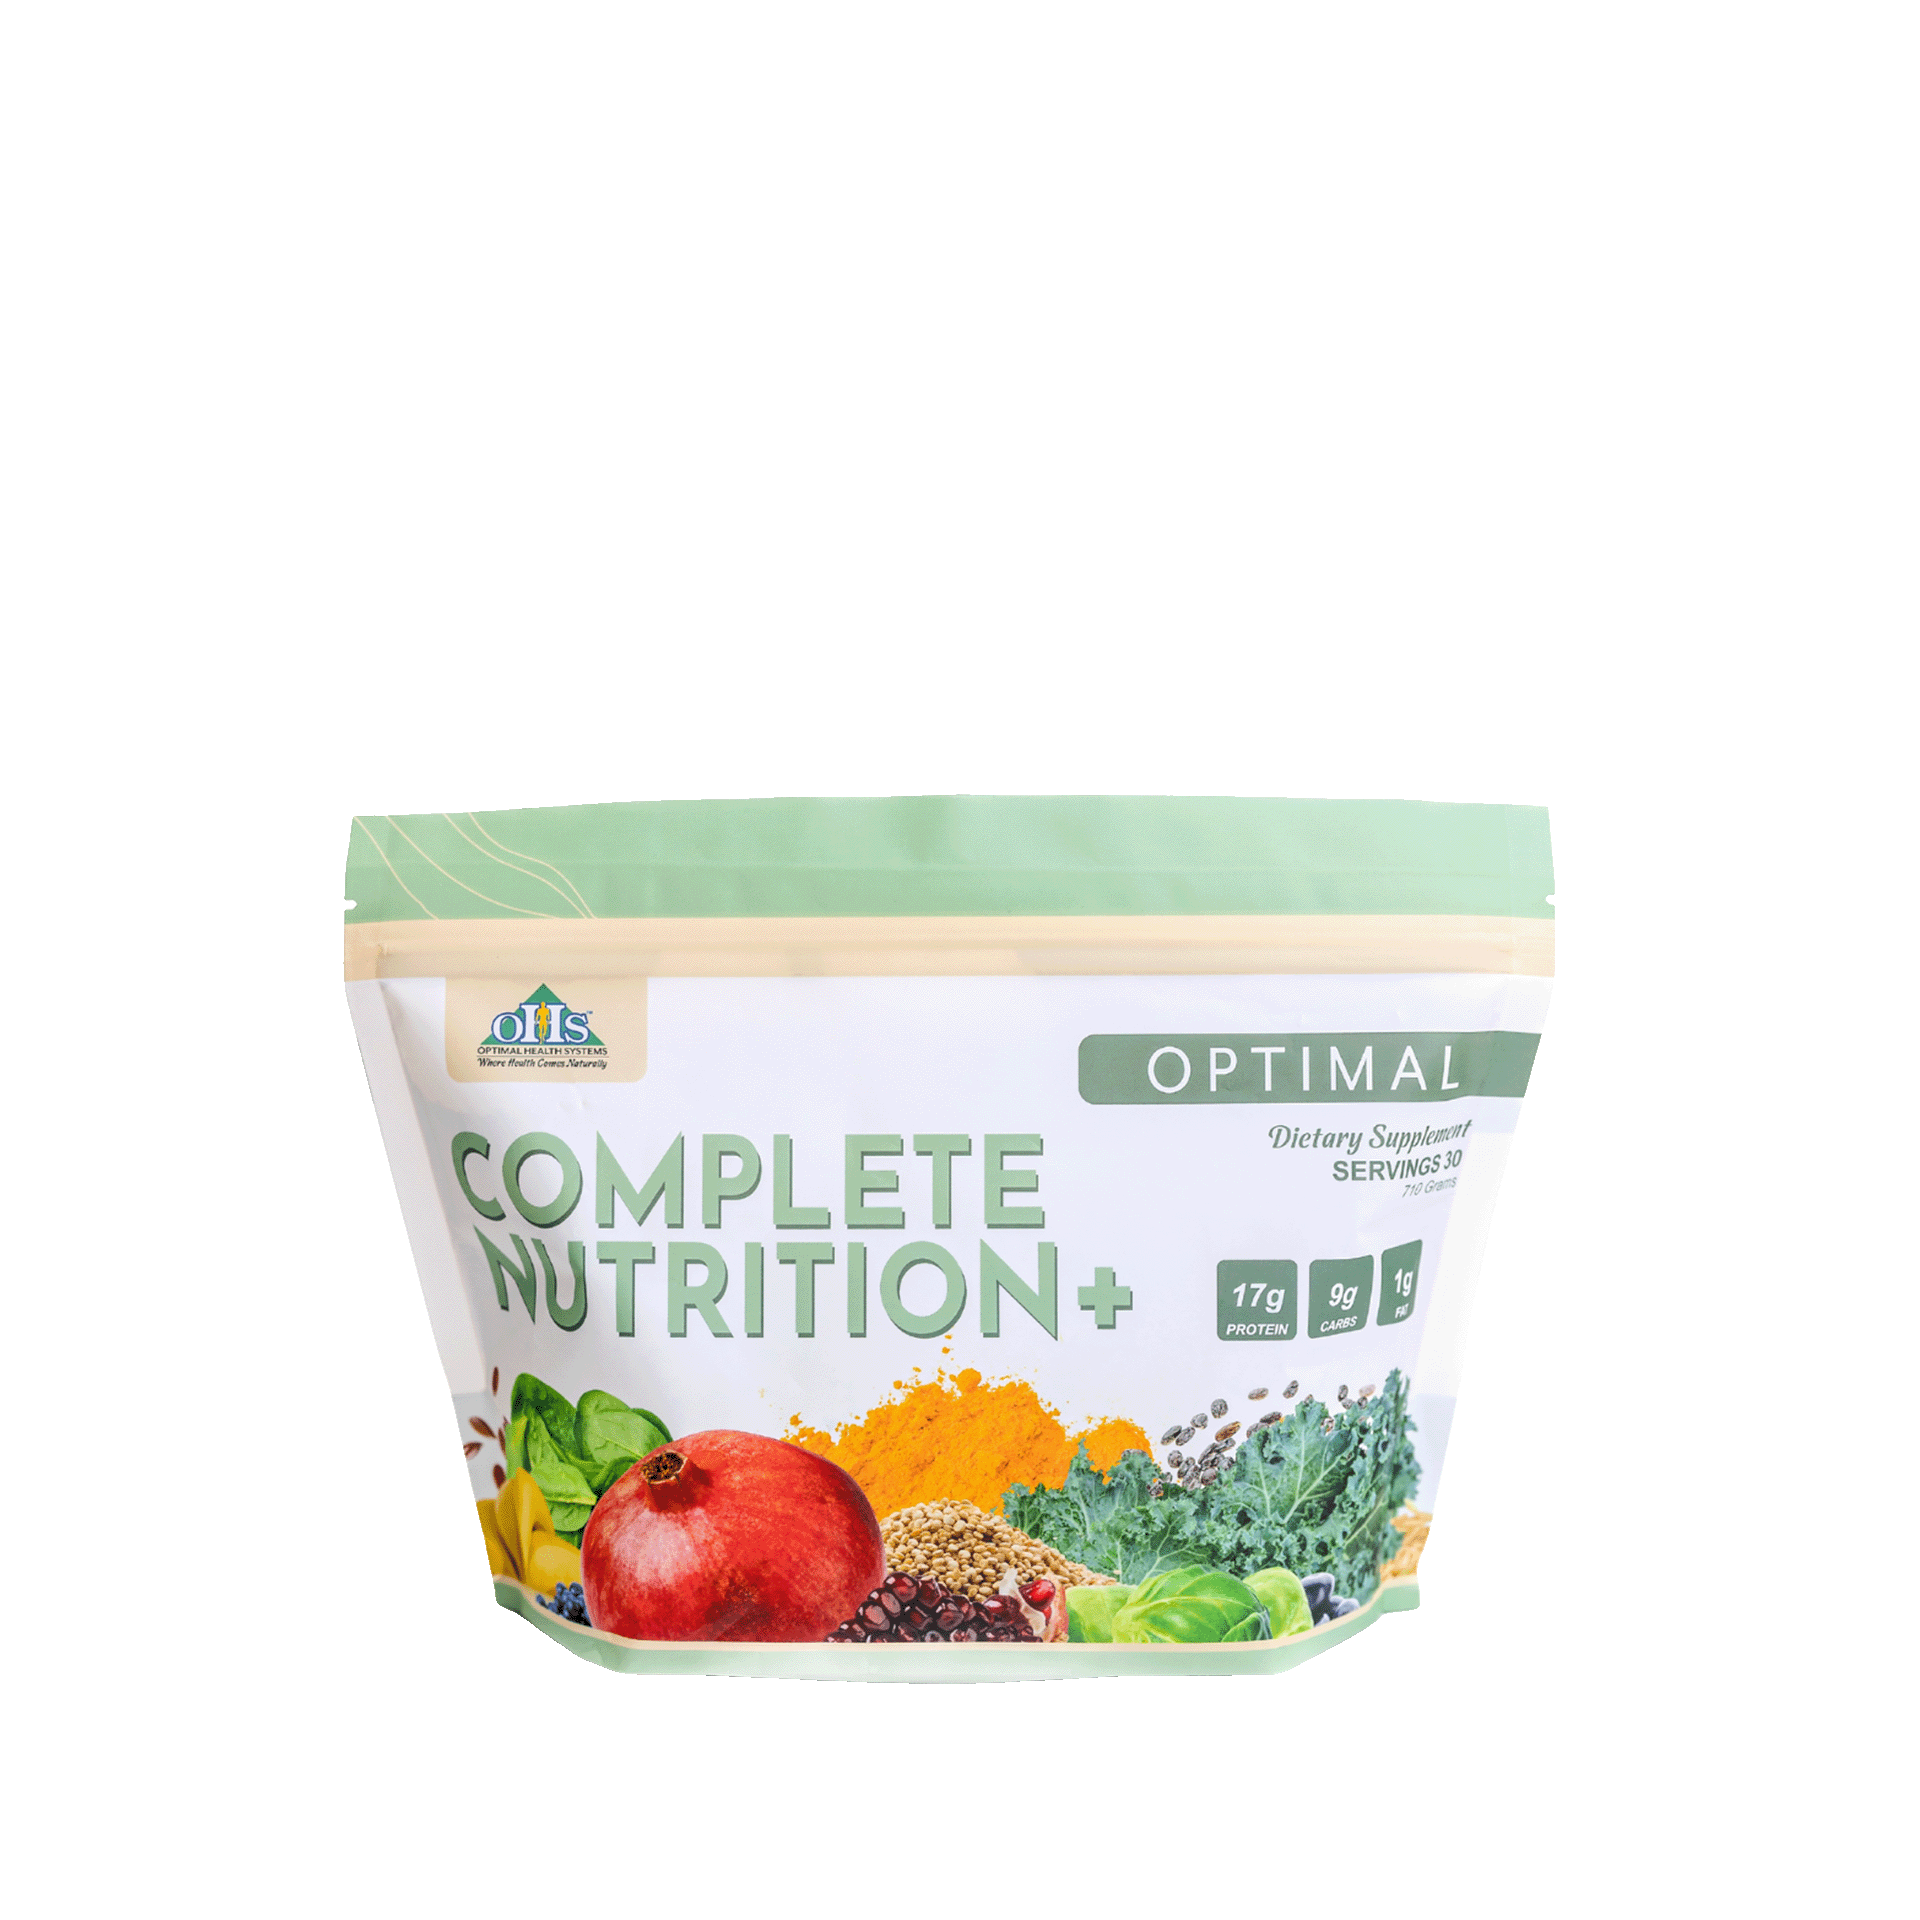 Image of a bottle of Optimal Complete Nutrition Plus.